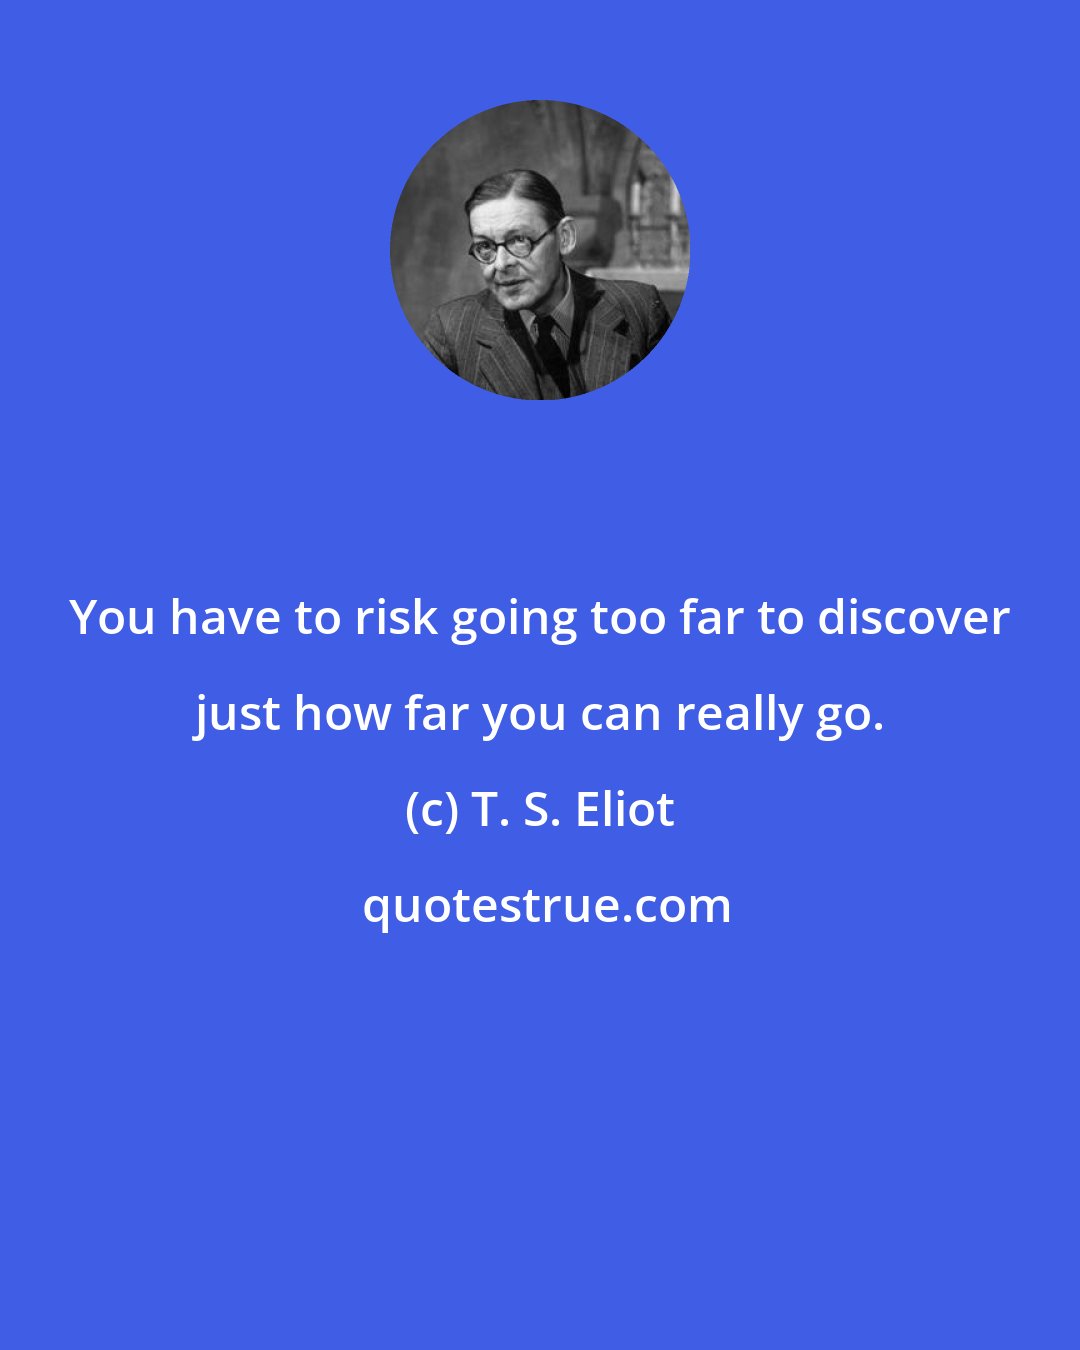 T. S. Eliot: You have to risk going too far to discover just how far you can really go.